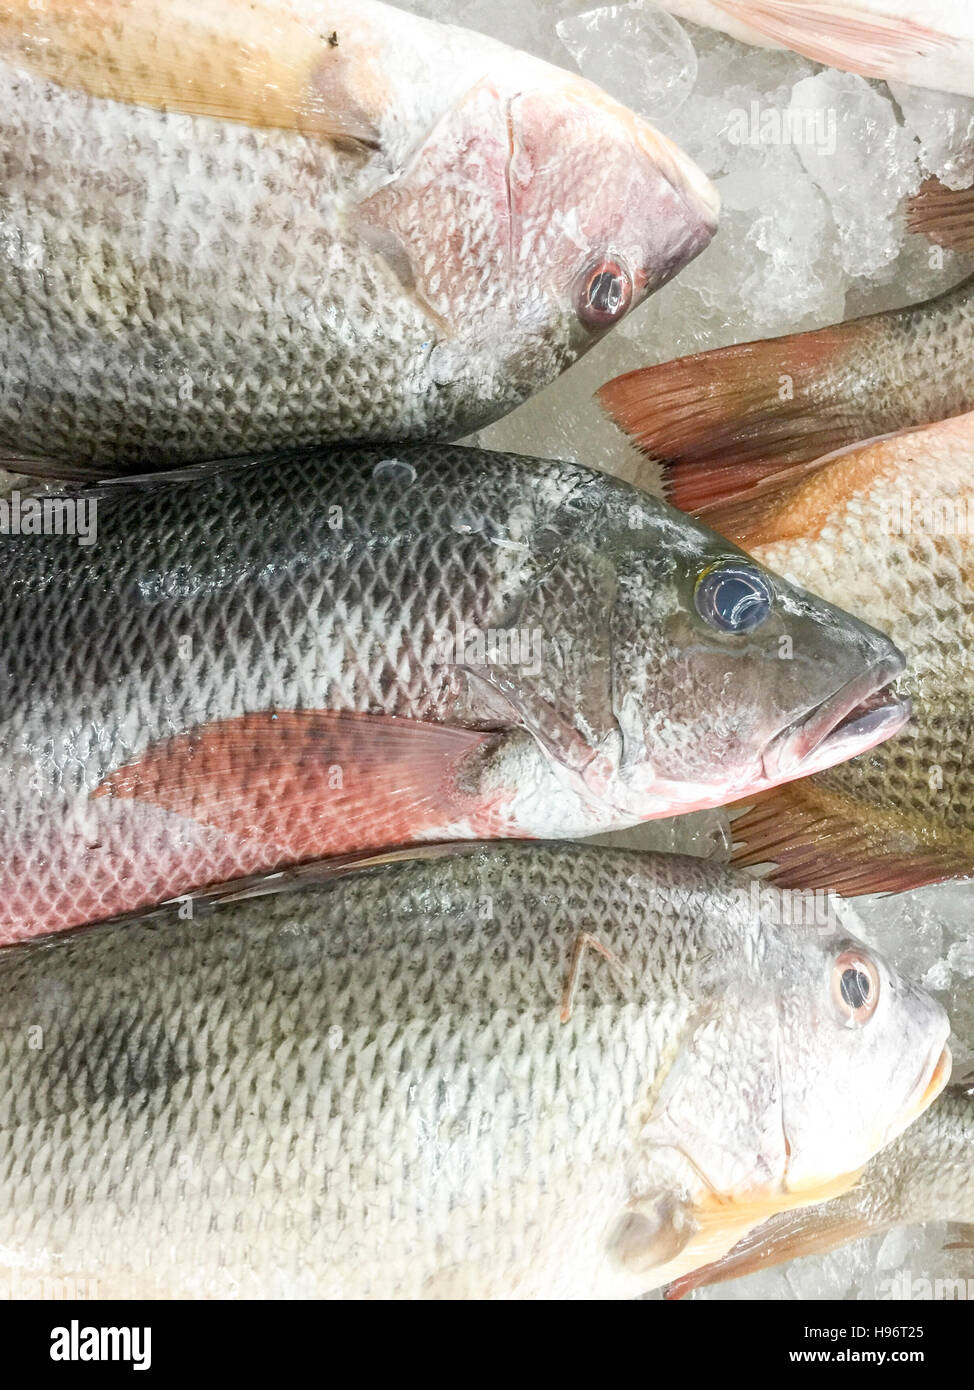 Acqua Pazza Of The Golden Eye Snapper Stock Photo, Picture and Royalty Free  Image. Image 136883063.